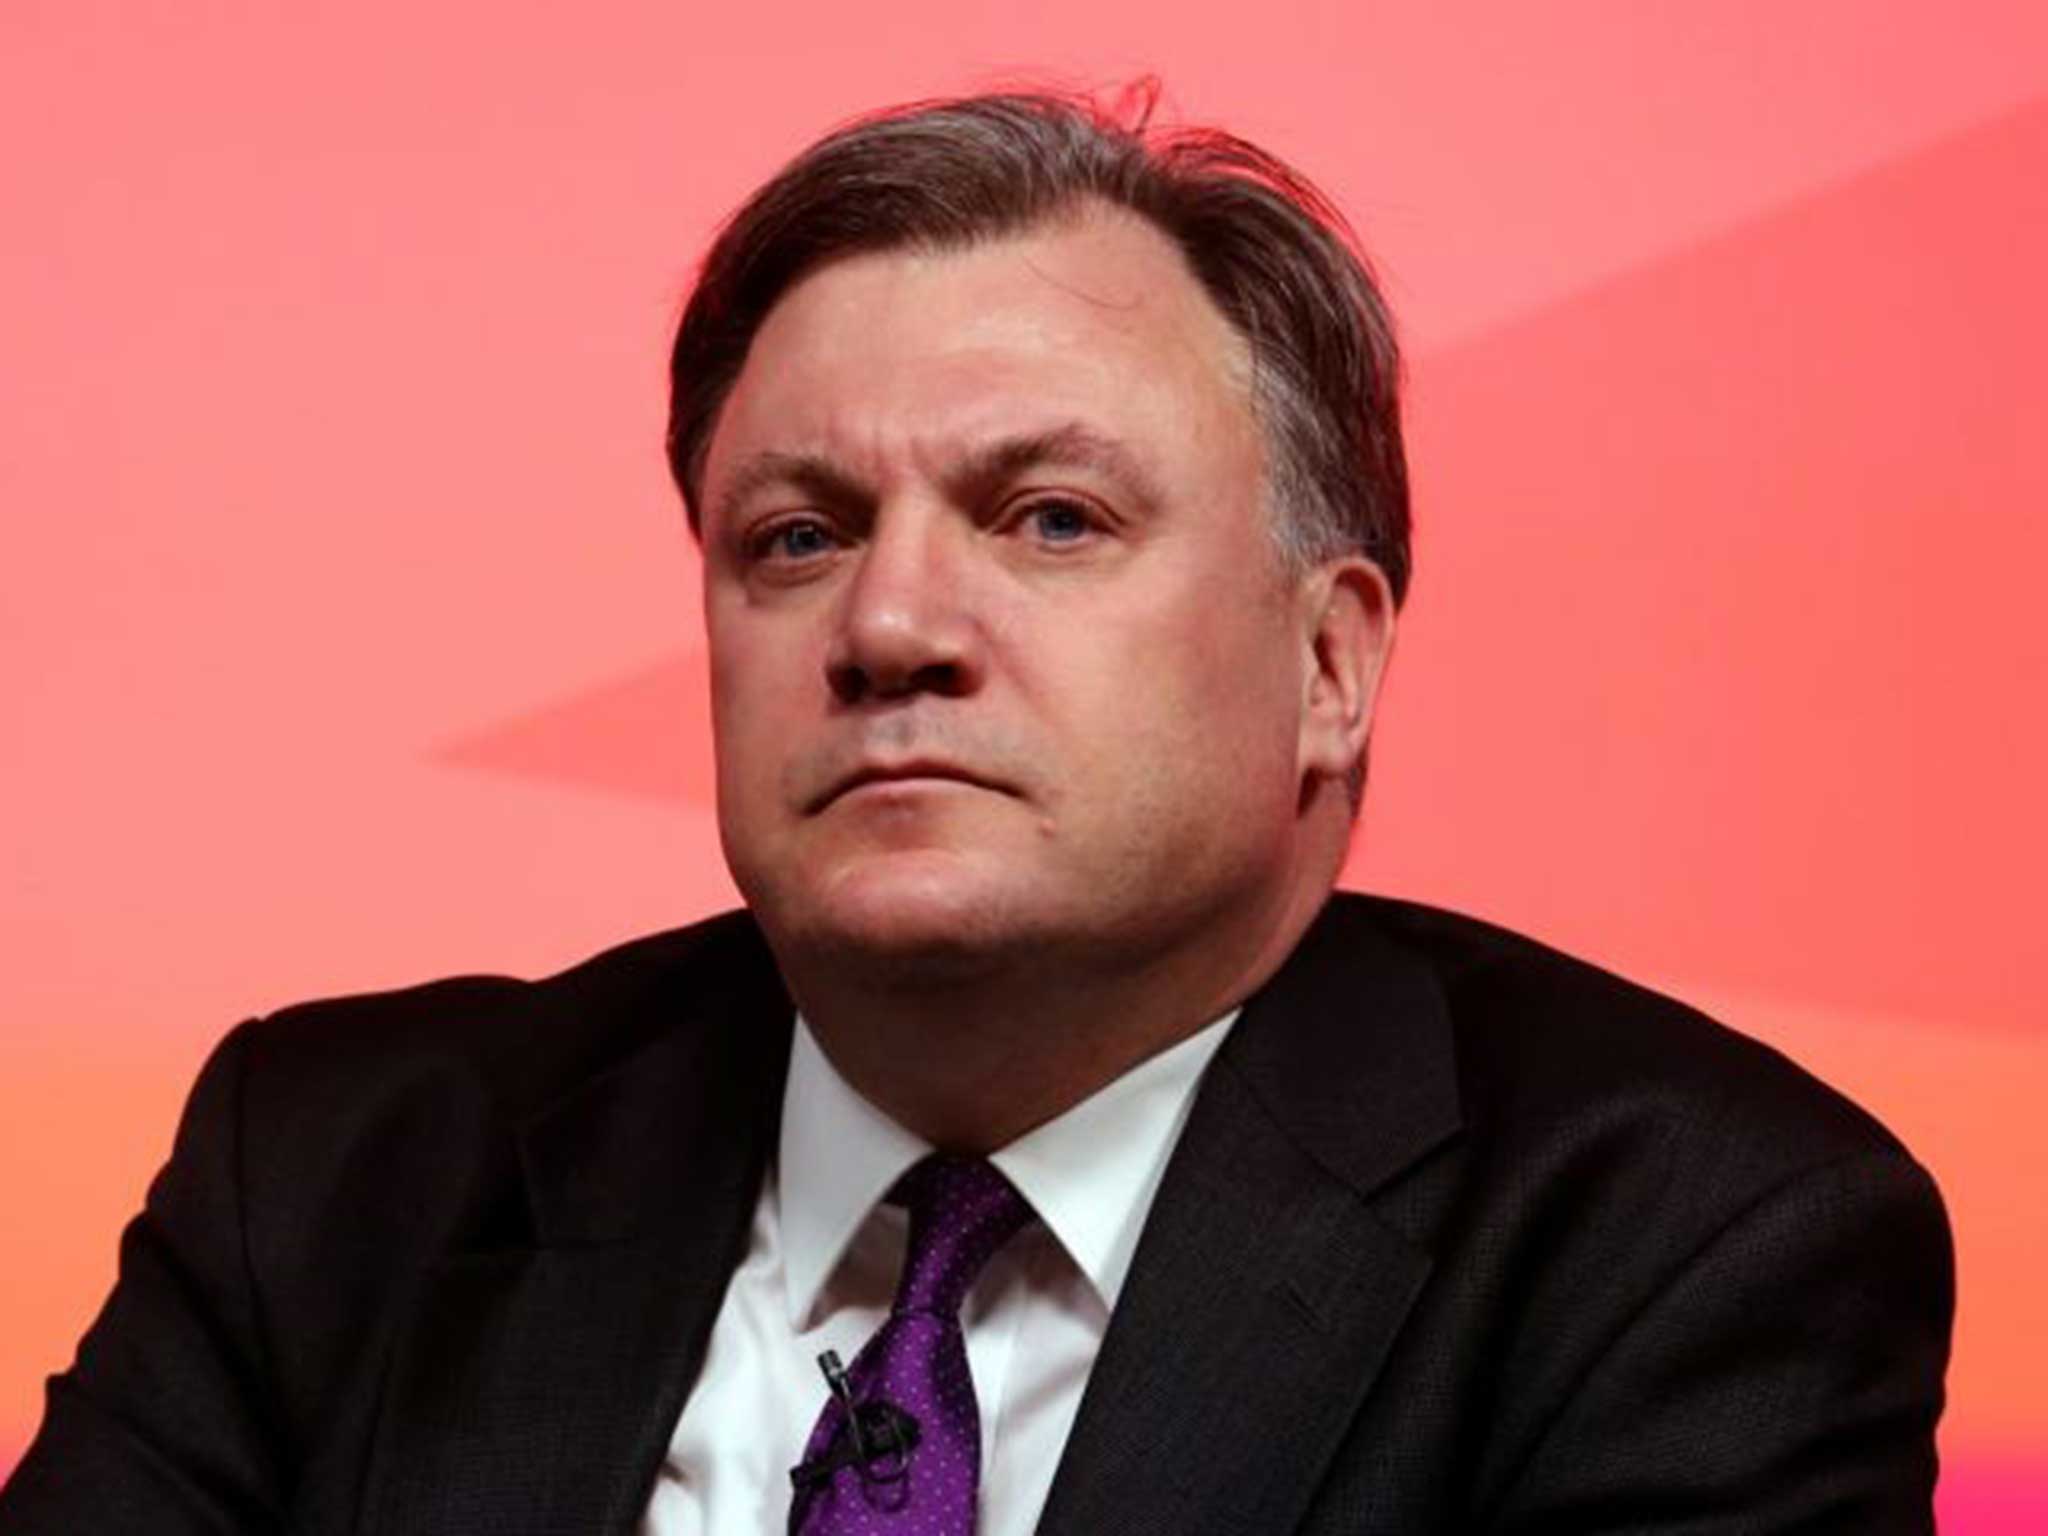 Ed Balls has ruled out a return to politics - for now